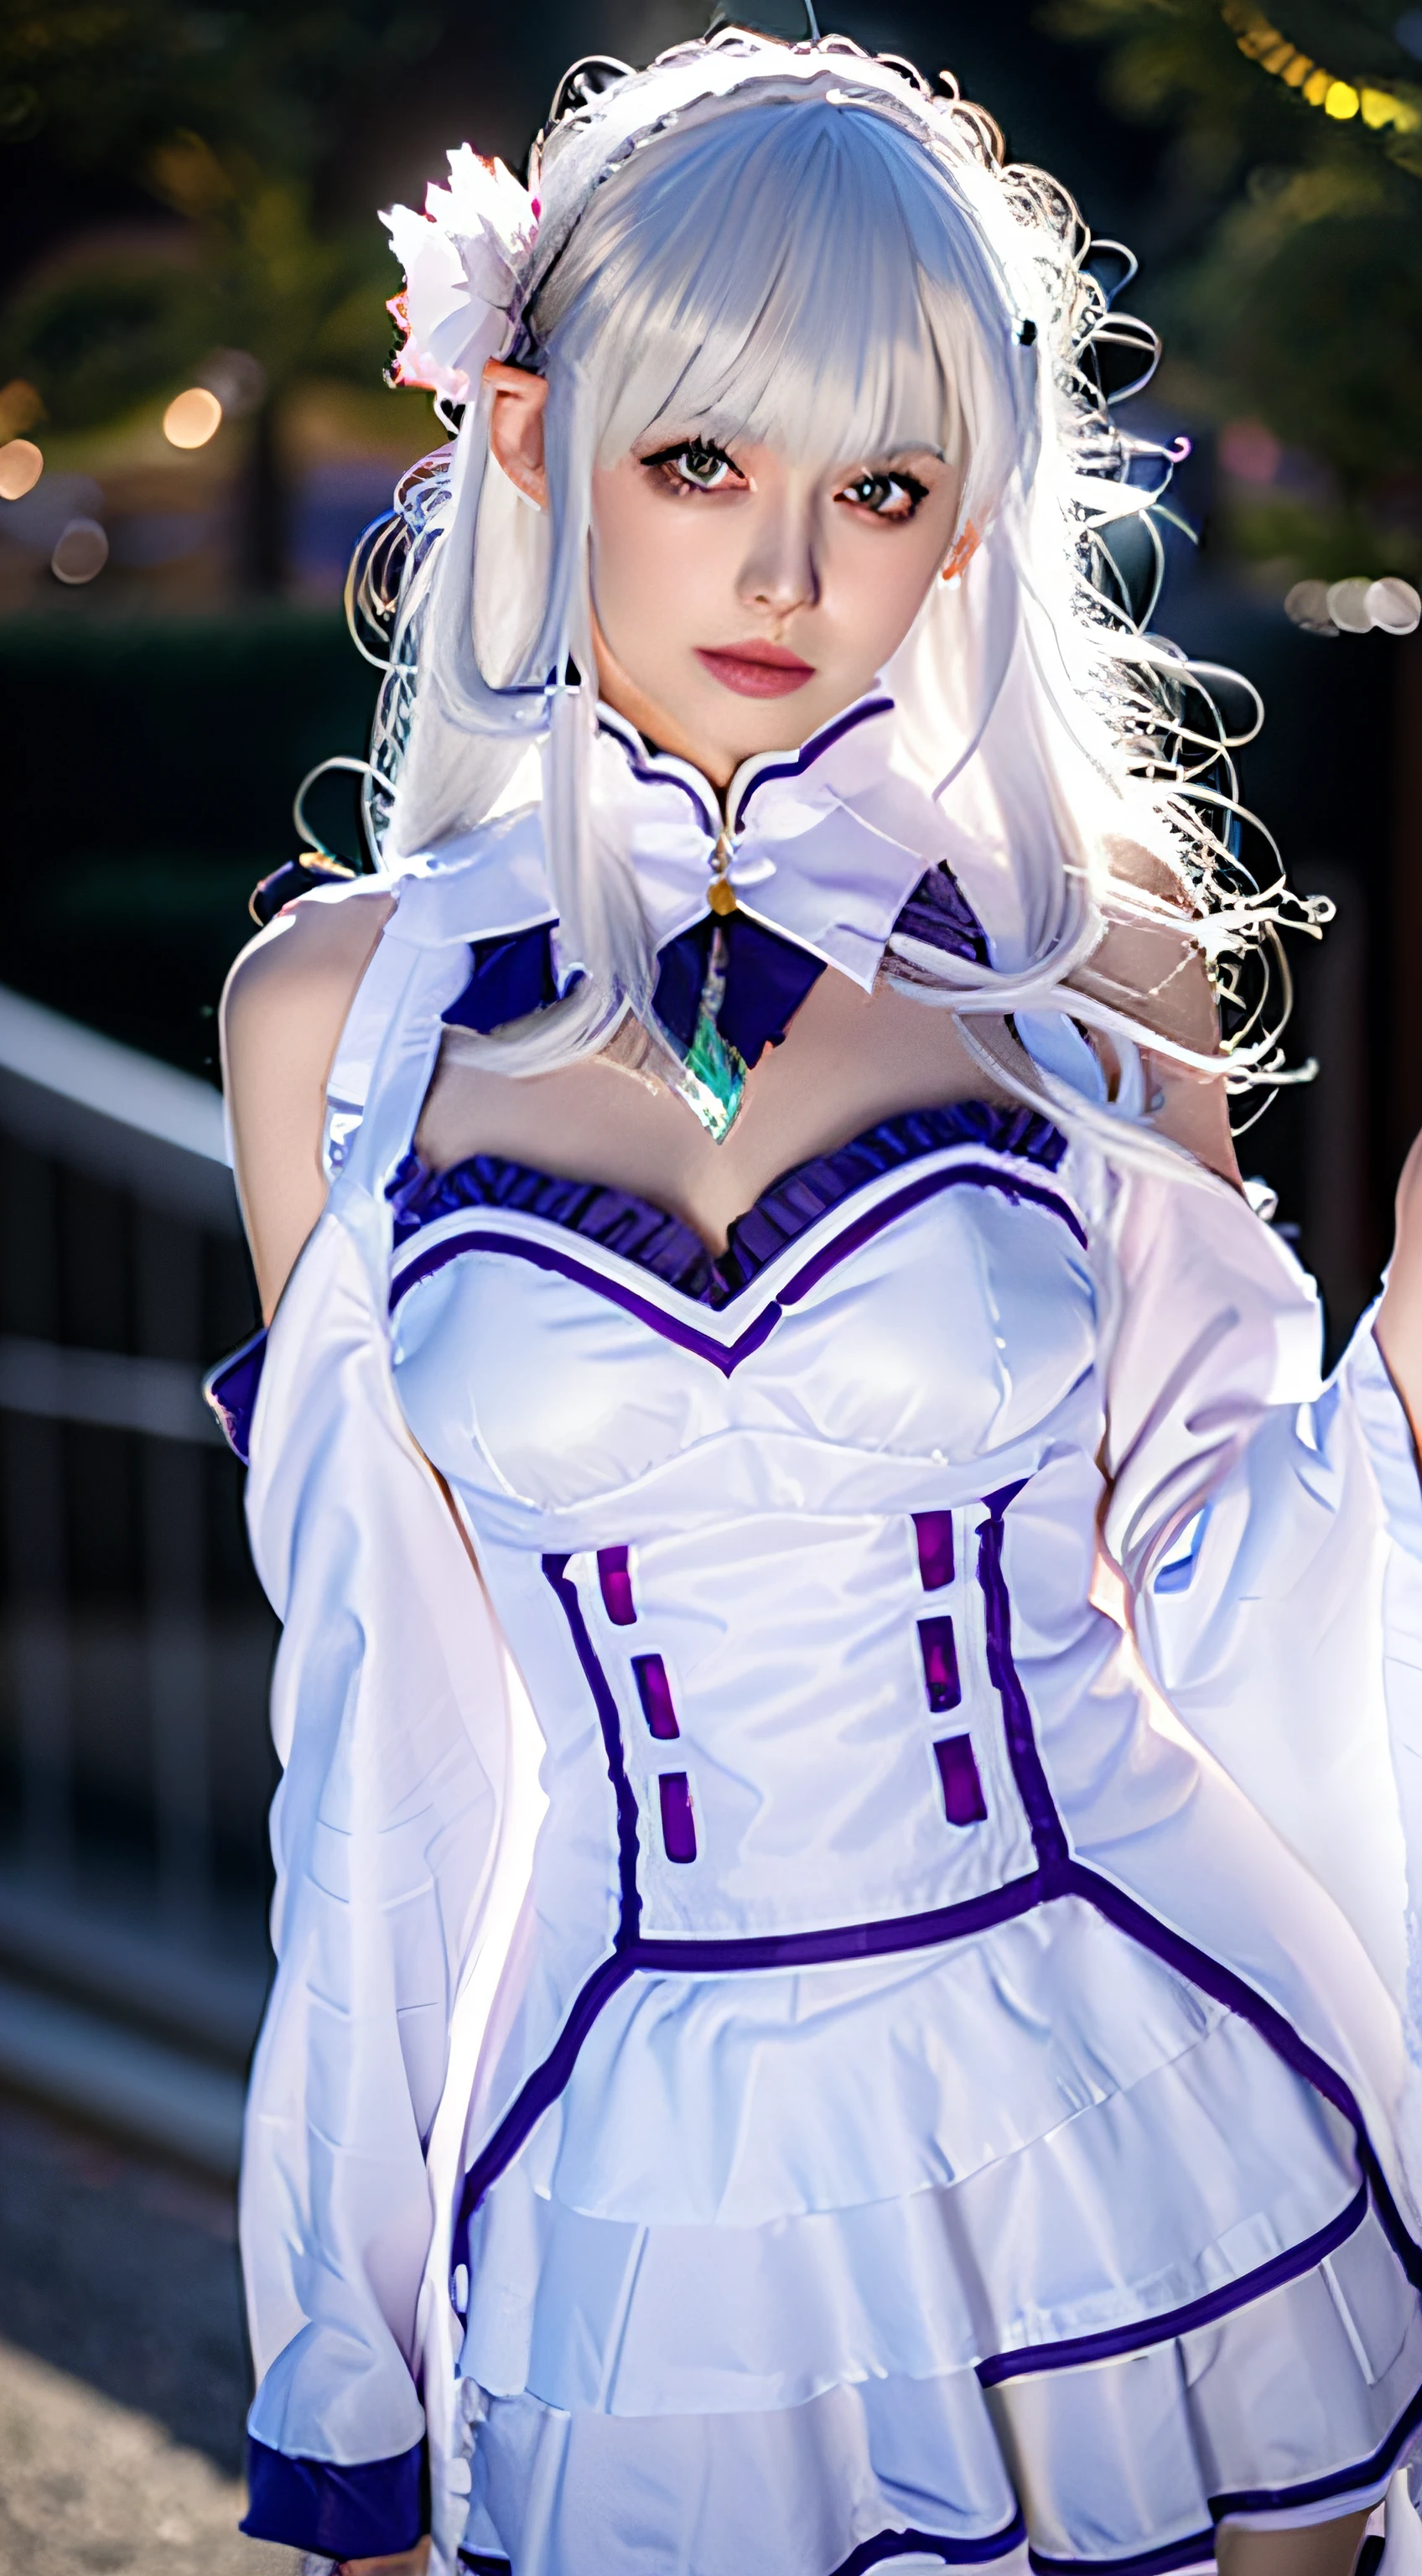 Realistic, 1girl in, White hair, Purple eyes, Glowing eyes, croptop, Skirt, Parted lips, blush, Night, Flowers, Sun, Sunlight, masutepiece, of the highest quality, High resolution, 1girl in, Best Quality, hight resolution, Ultra-detailed, King Emilia:Staynight, Look at viewers, 8K UHD, (masutepiece,Best Quality: 1.2), Ultra-detailed face, hight resolution, 1girl solo, ((Female )), Detail Face, Realistic, perfect hand, Bokeh, Perfect face, 8K UHD, 20yr old female, (Half body:1.5), (medium breasts:1.2), Photorealistic, Ultrarealistic, absurderes, unbelievable Ridiculous, Canon EOS R6, 85 mm, 1/200/5.6, ISO 1600, nice hand, Perfect hands